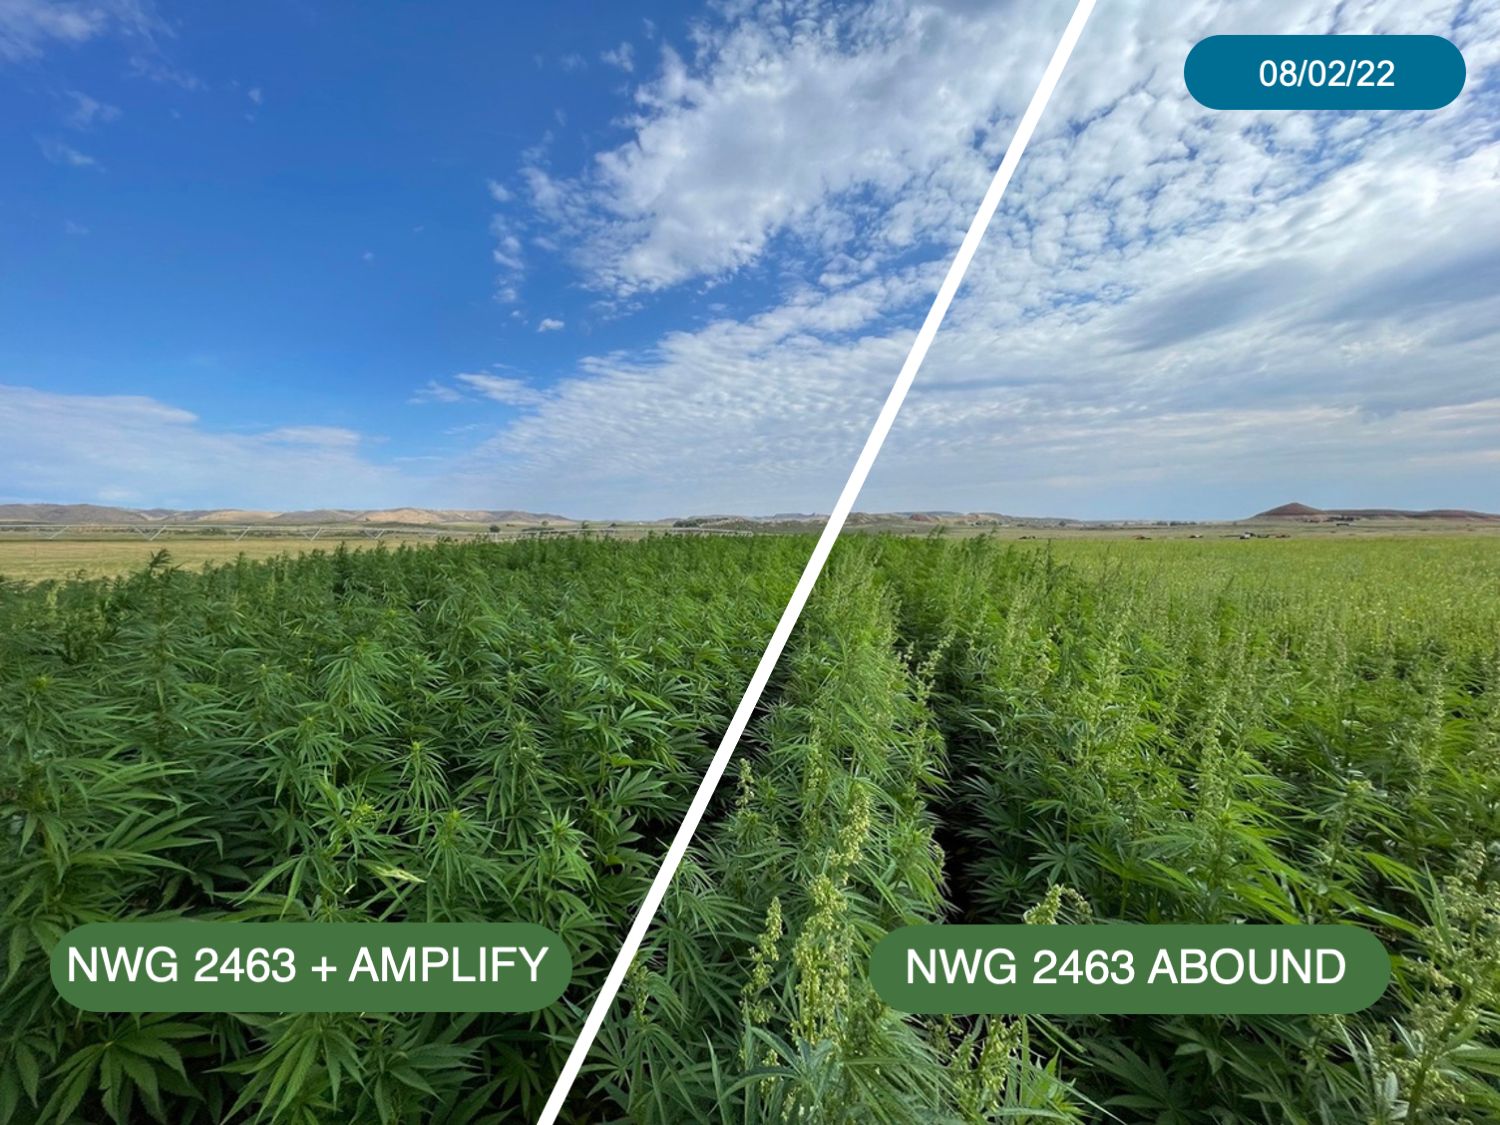 AMPLIFY Hybrid Hemp Genetics Compared to Conventional Seed Variety